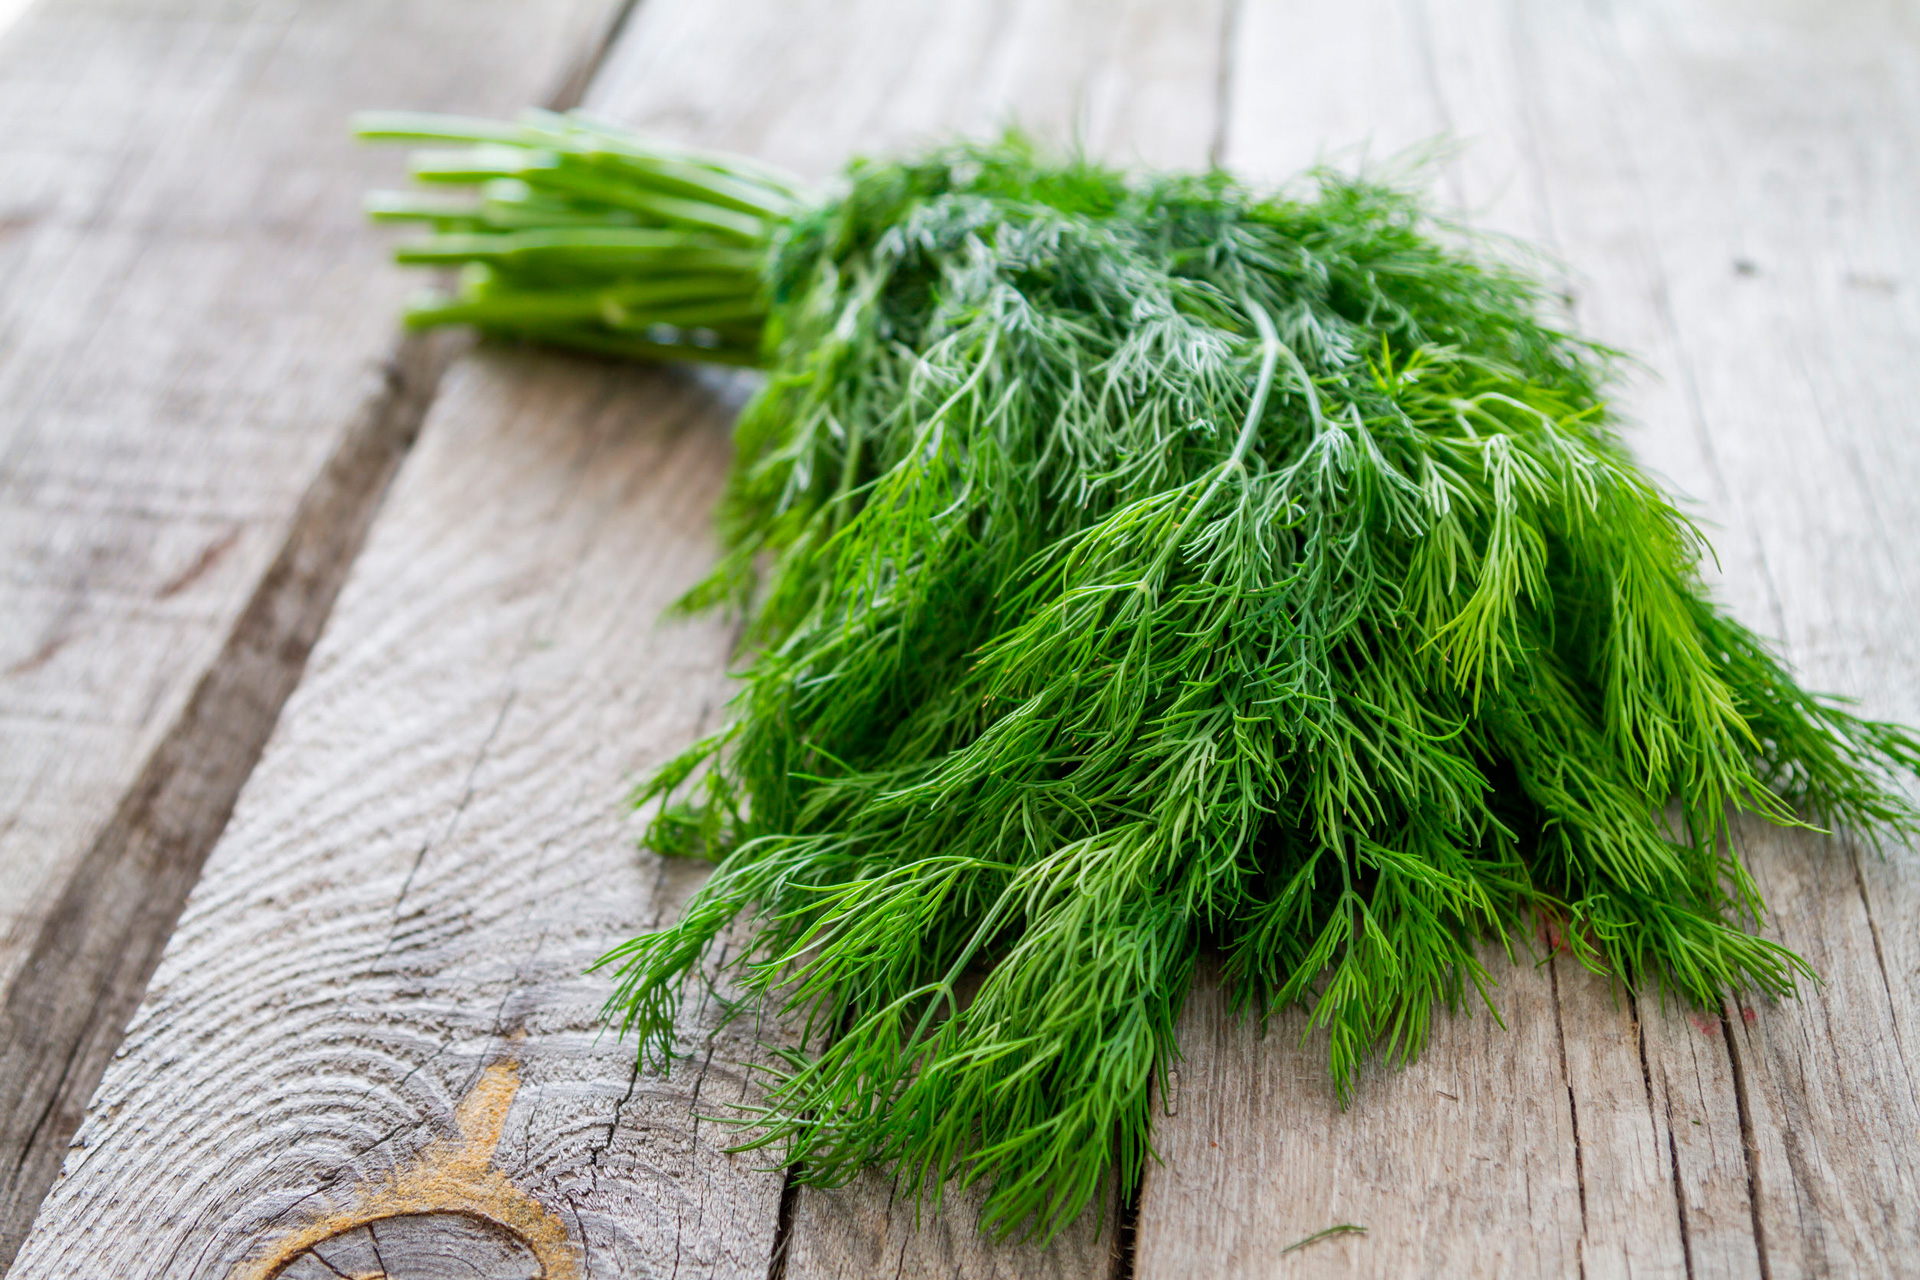 Dill Leaves Benefits and Recipes - Women Fitness Org